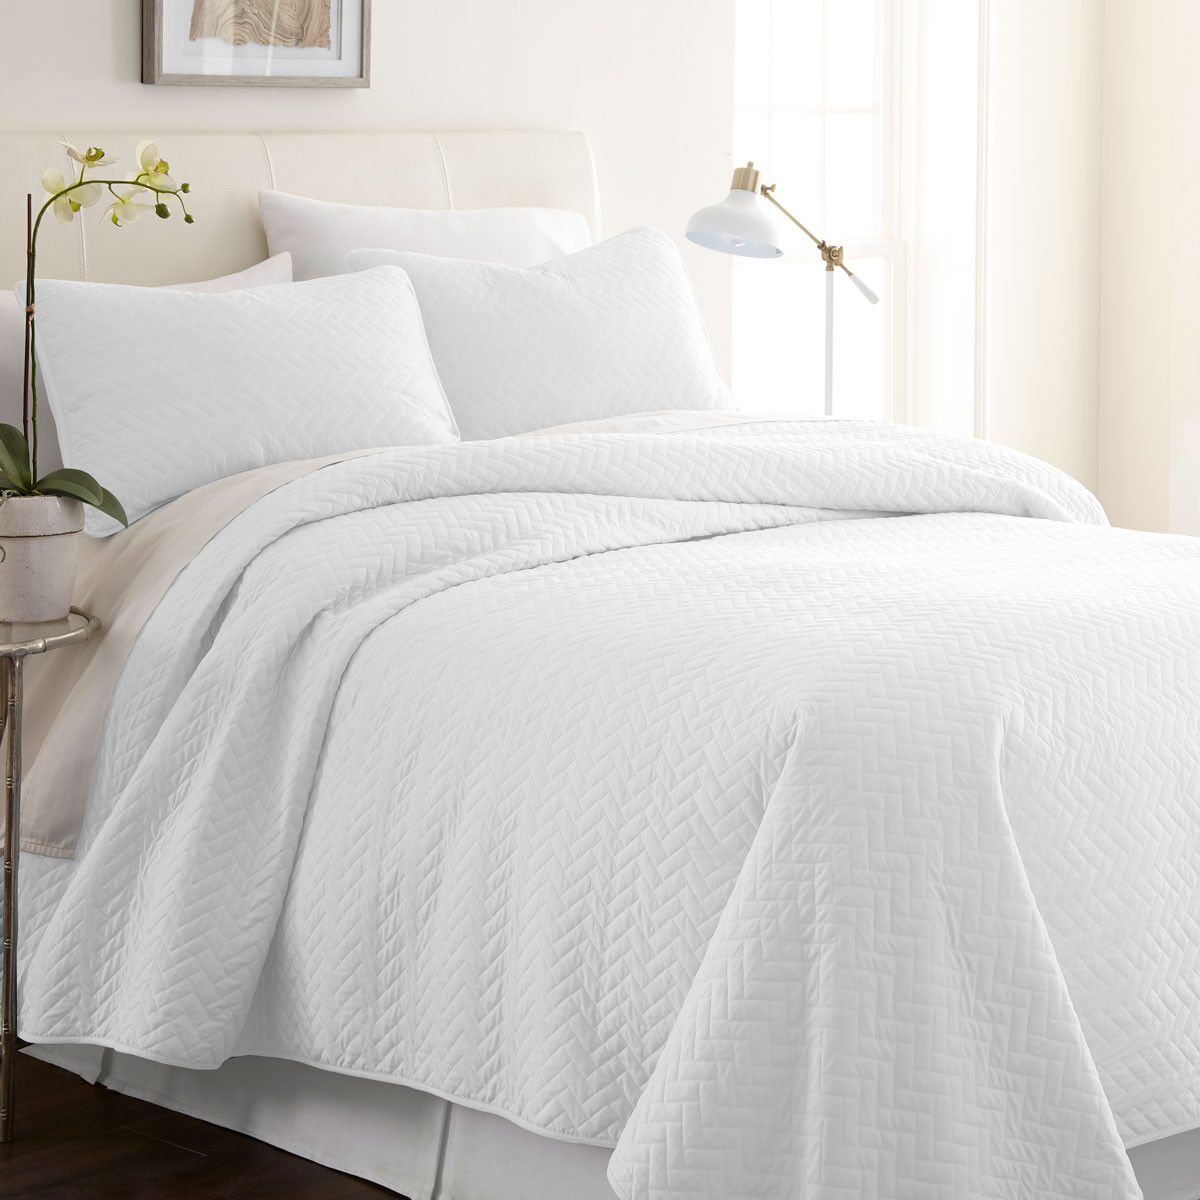 How does the texture feel on the 3-Piece Herring Quilted Coverlet Set?